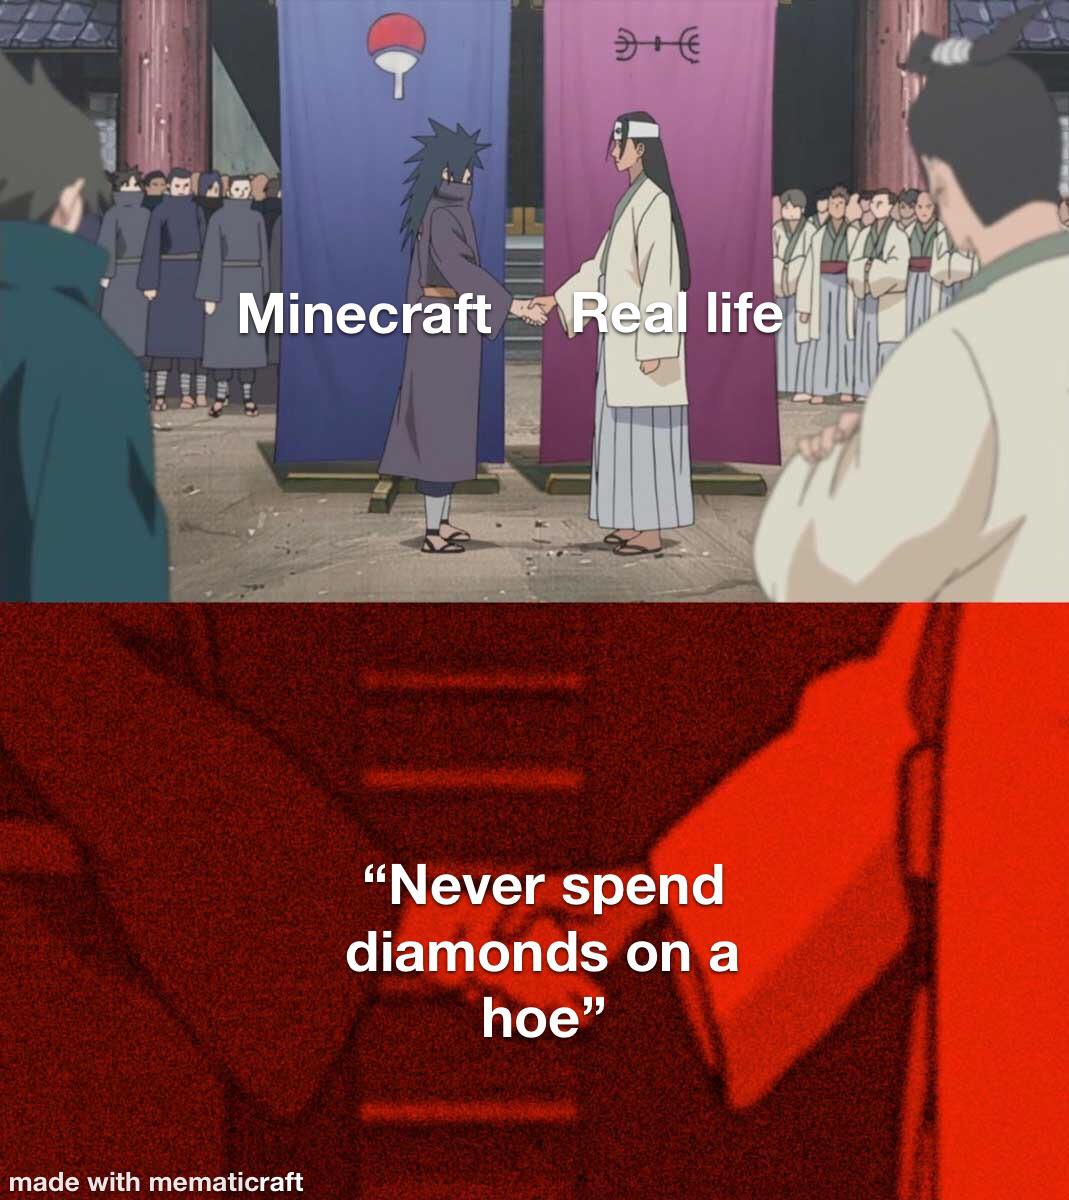 signal whatsapp meme - Minecraft Real life "Never spend diamonds on a hoe" made with mematicraft